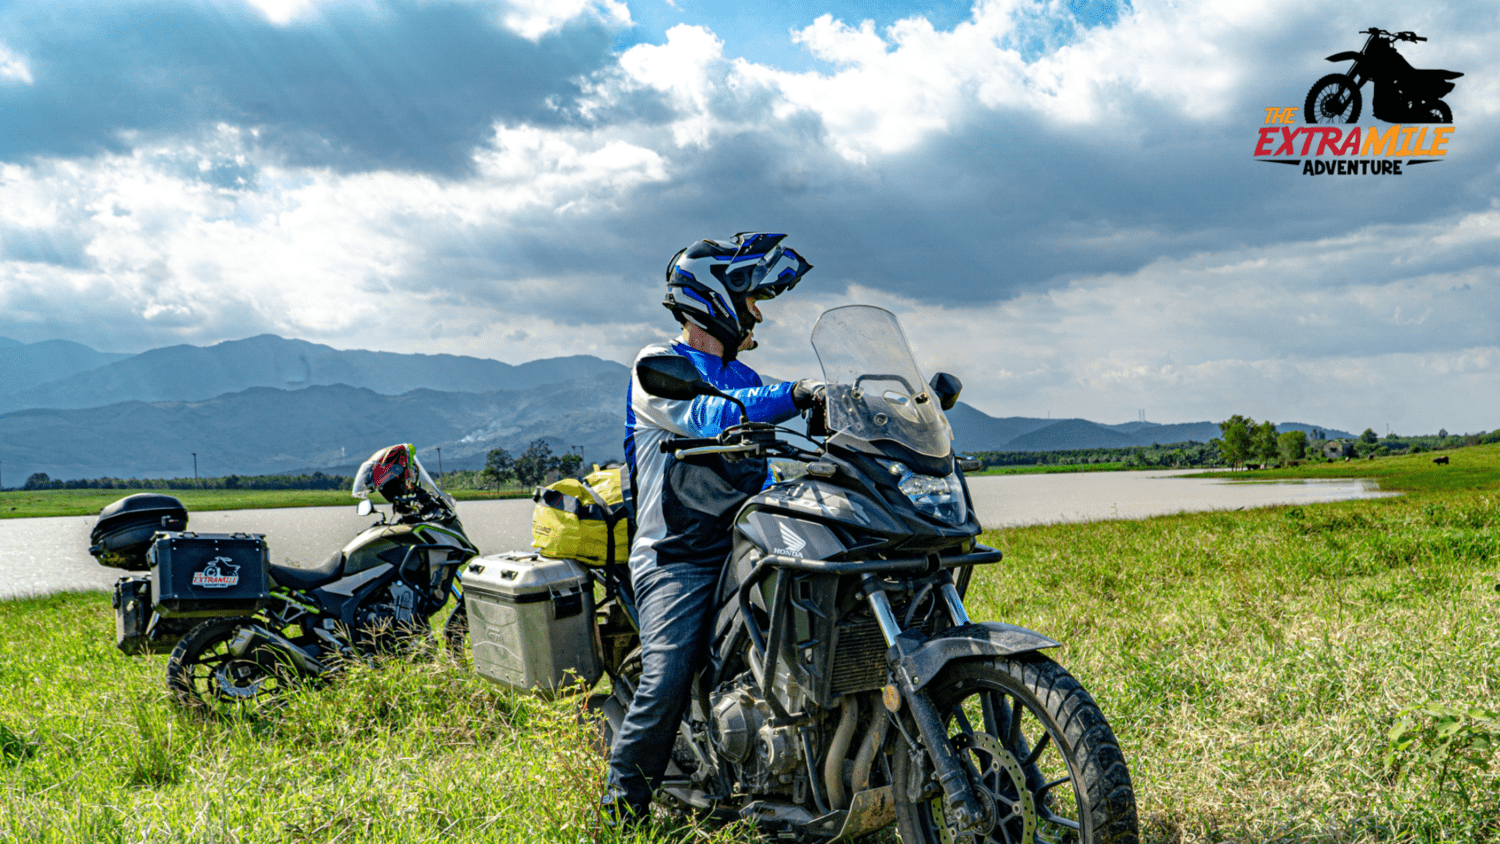 114 - CENTER - Quang Binh - lake and big bikes searching direction and enjoying beautiful scenary The Extra Mile Adventure Motorbike Tours Vietnam